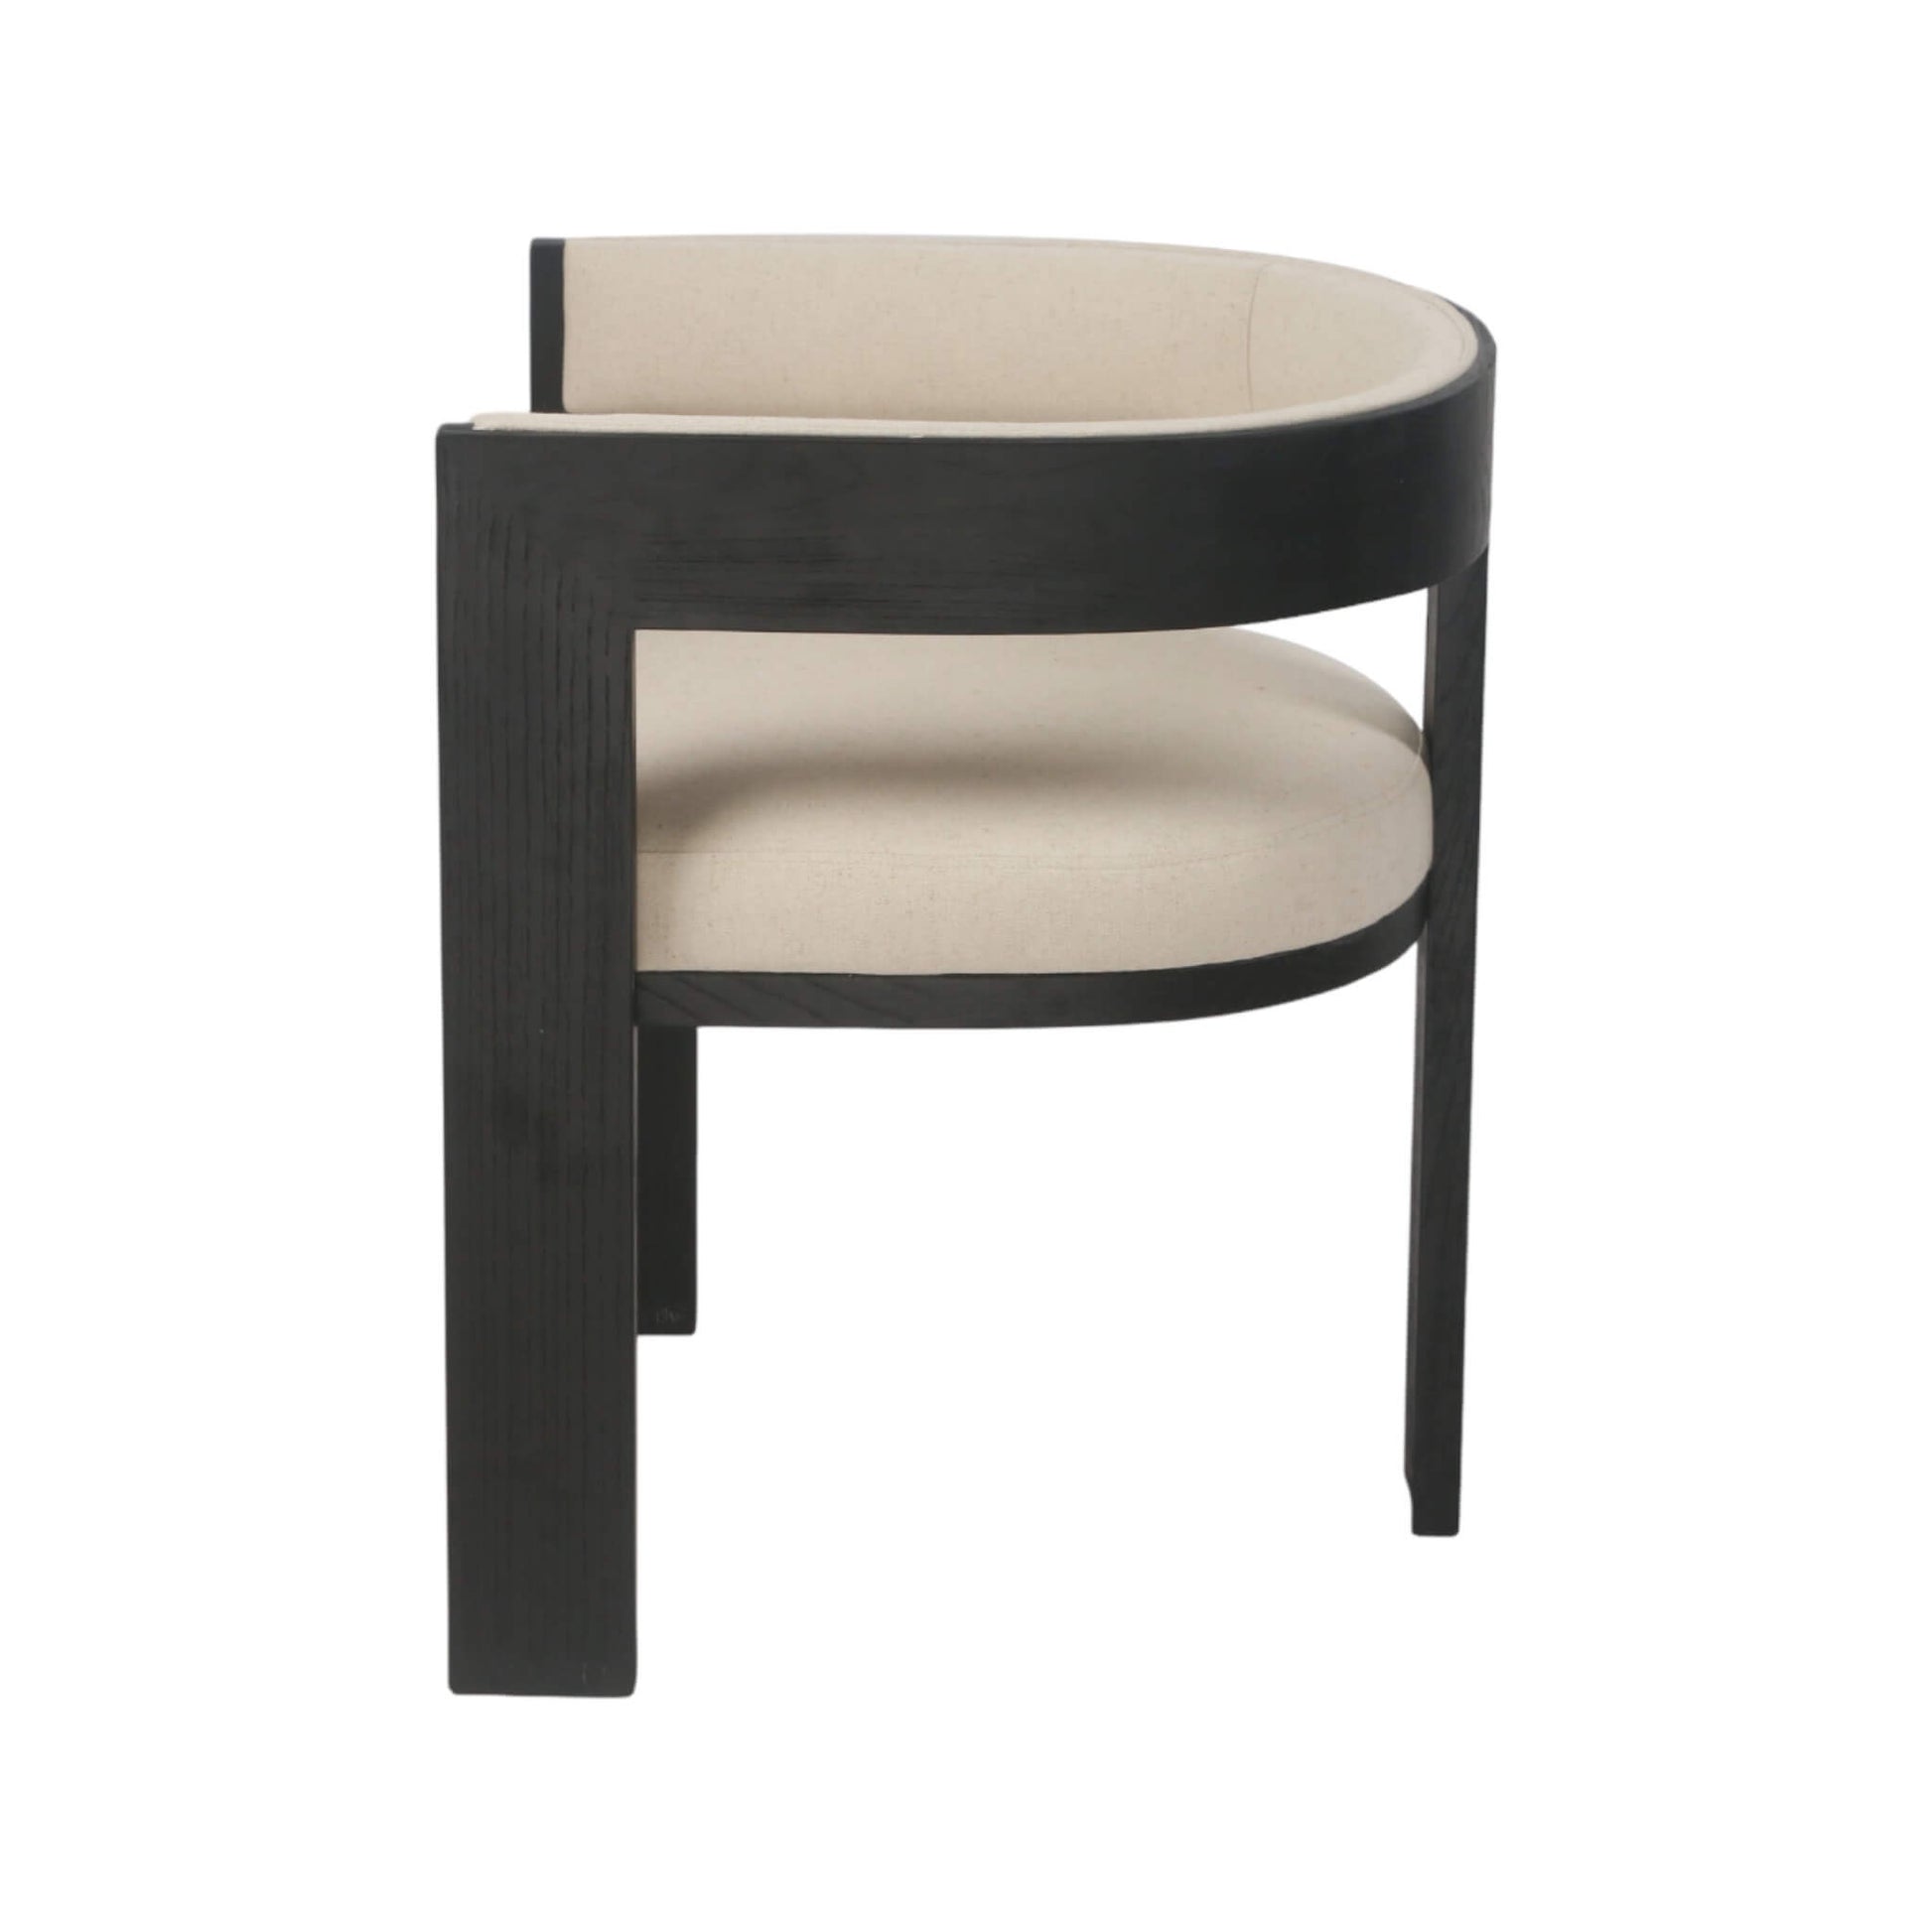 Panama | Coastal Hamptons Wooden Dining Chair With Arms | Set Of 2 | Black